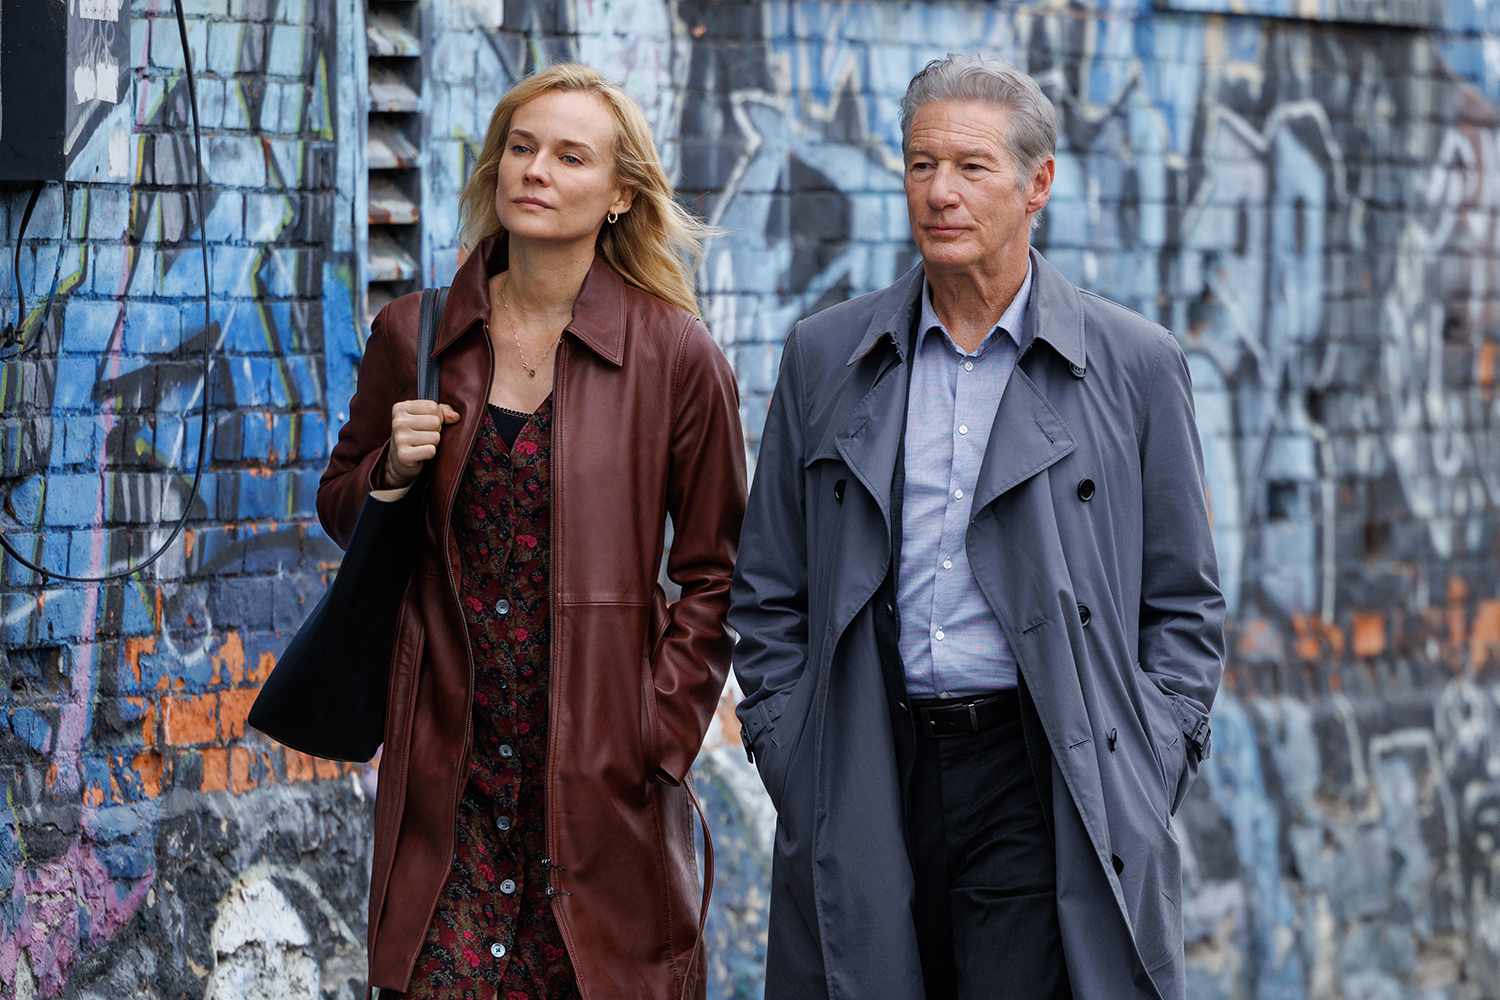 Richard Gere and Diane Kruger Star in Suspenseful Trailer for the Twisty Thriller 'Longing' (Exclusive)